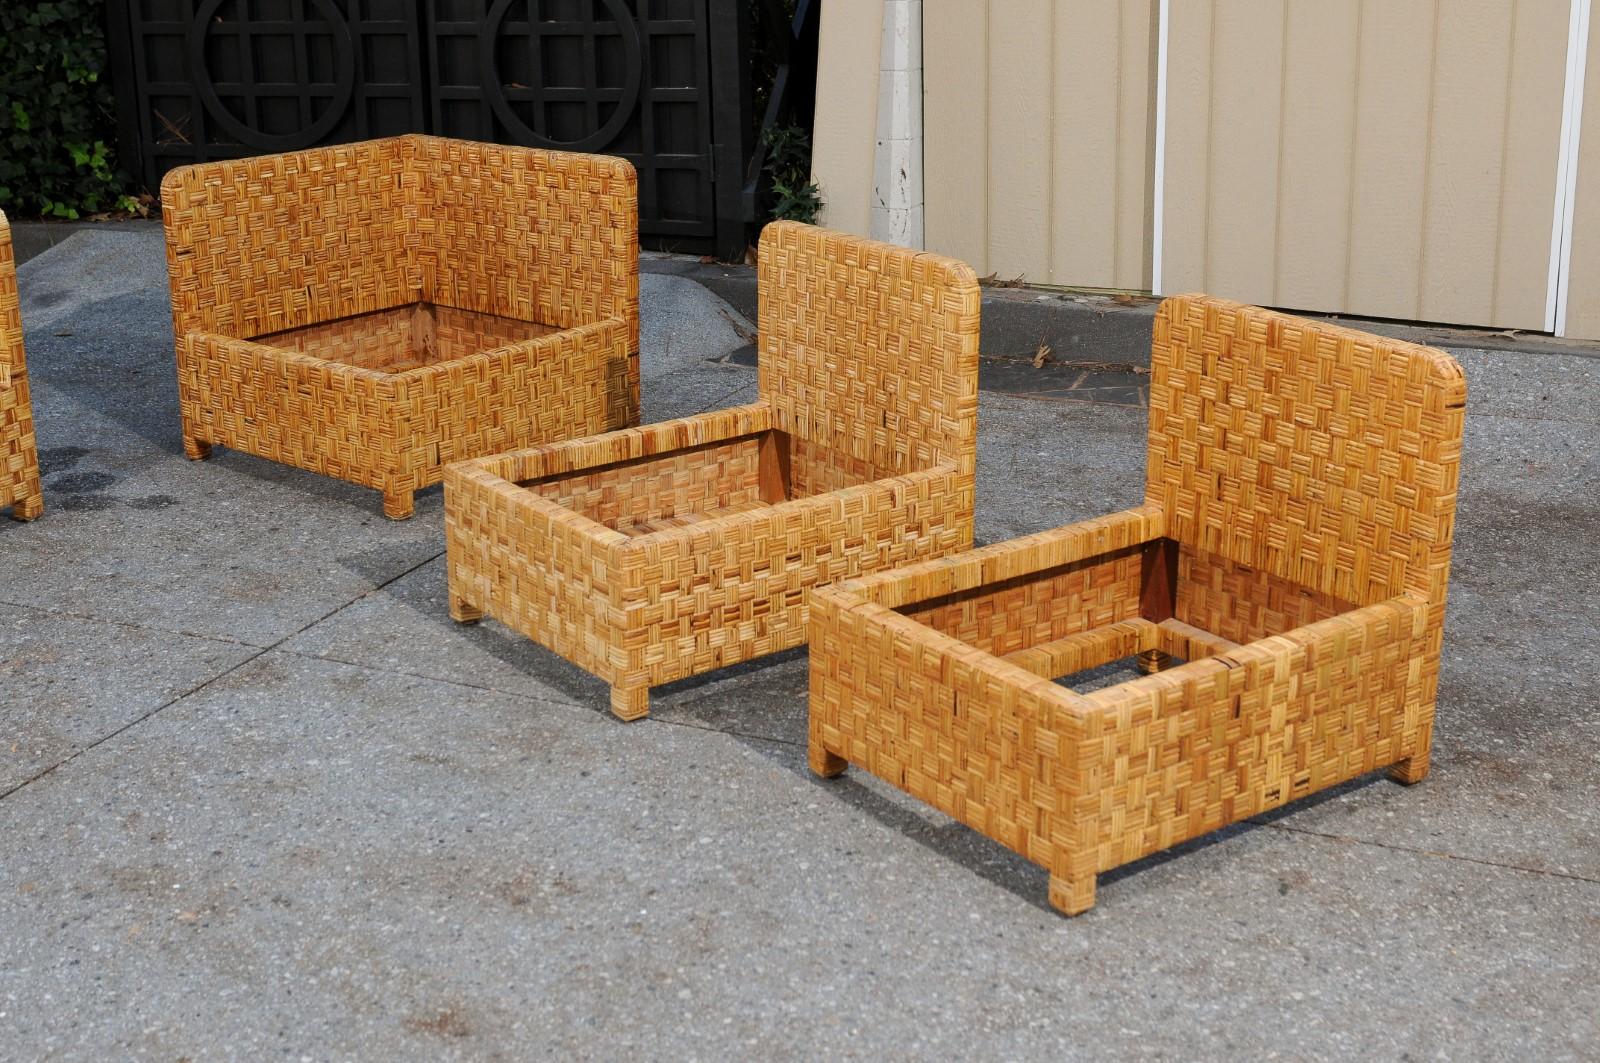 Stellar 6-Piece Basketweave Cane Seating Set by Danny Ho Fong, circa 1975 For Sale 7